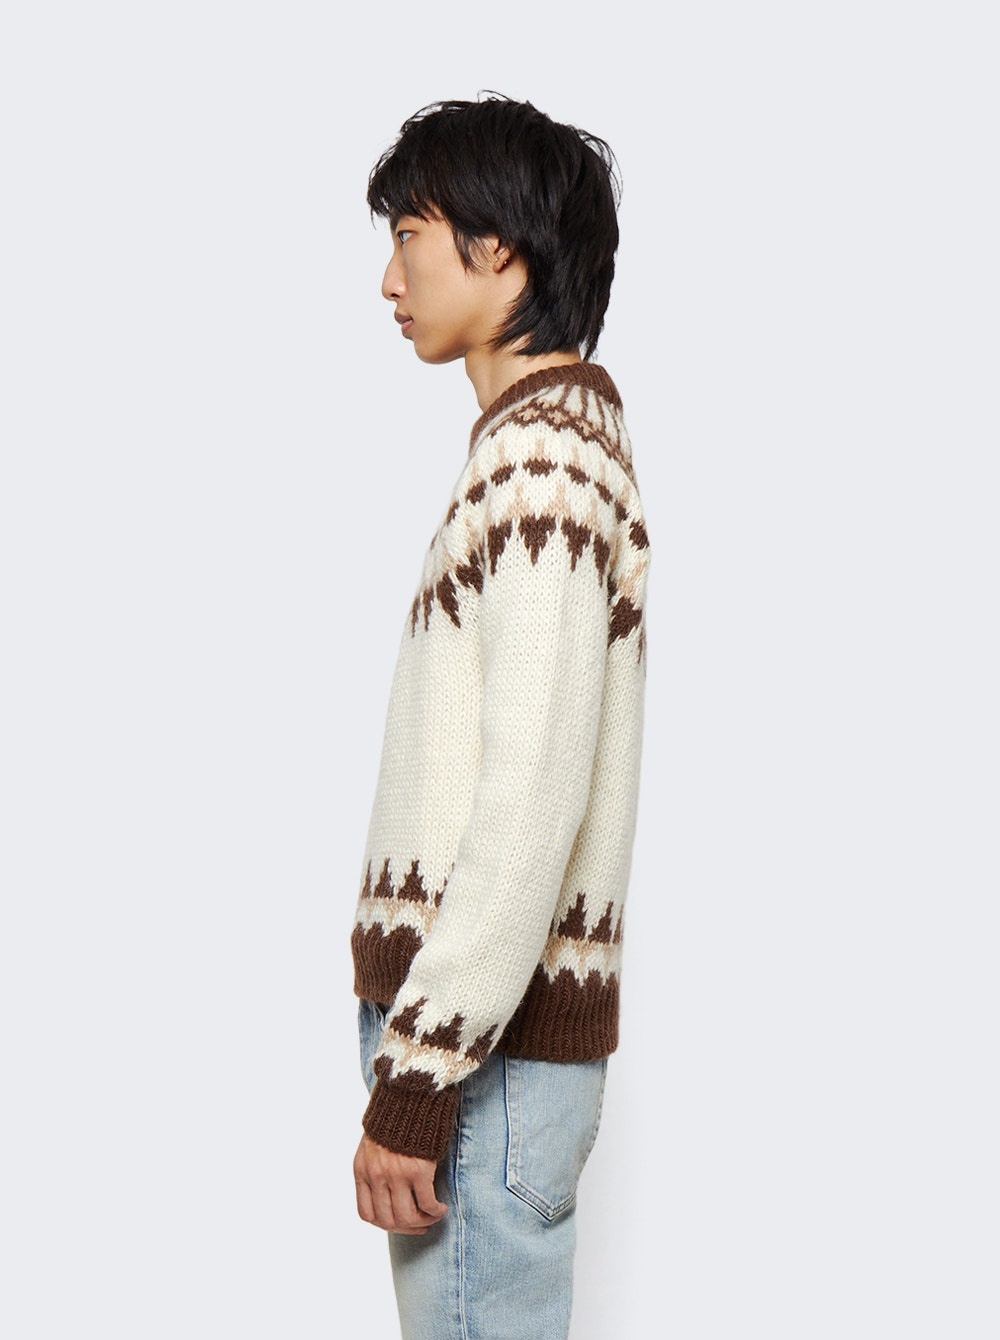 Knit Sweater Beige And Maroon - 4